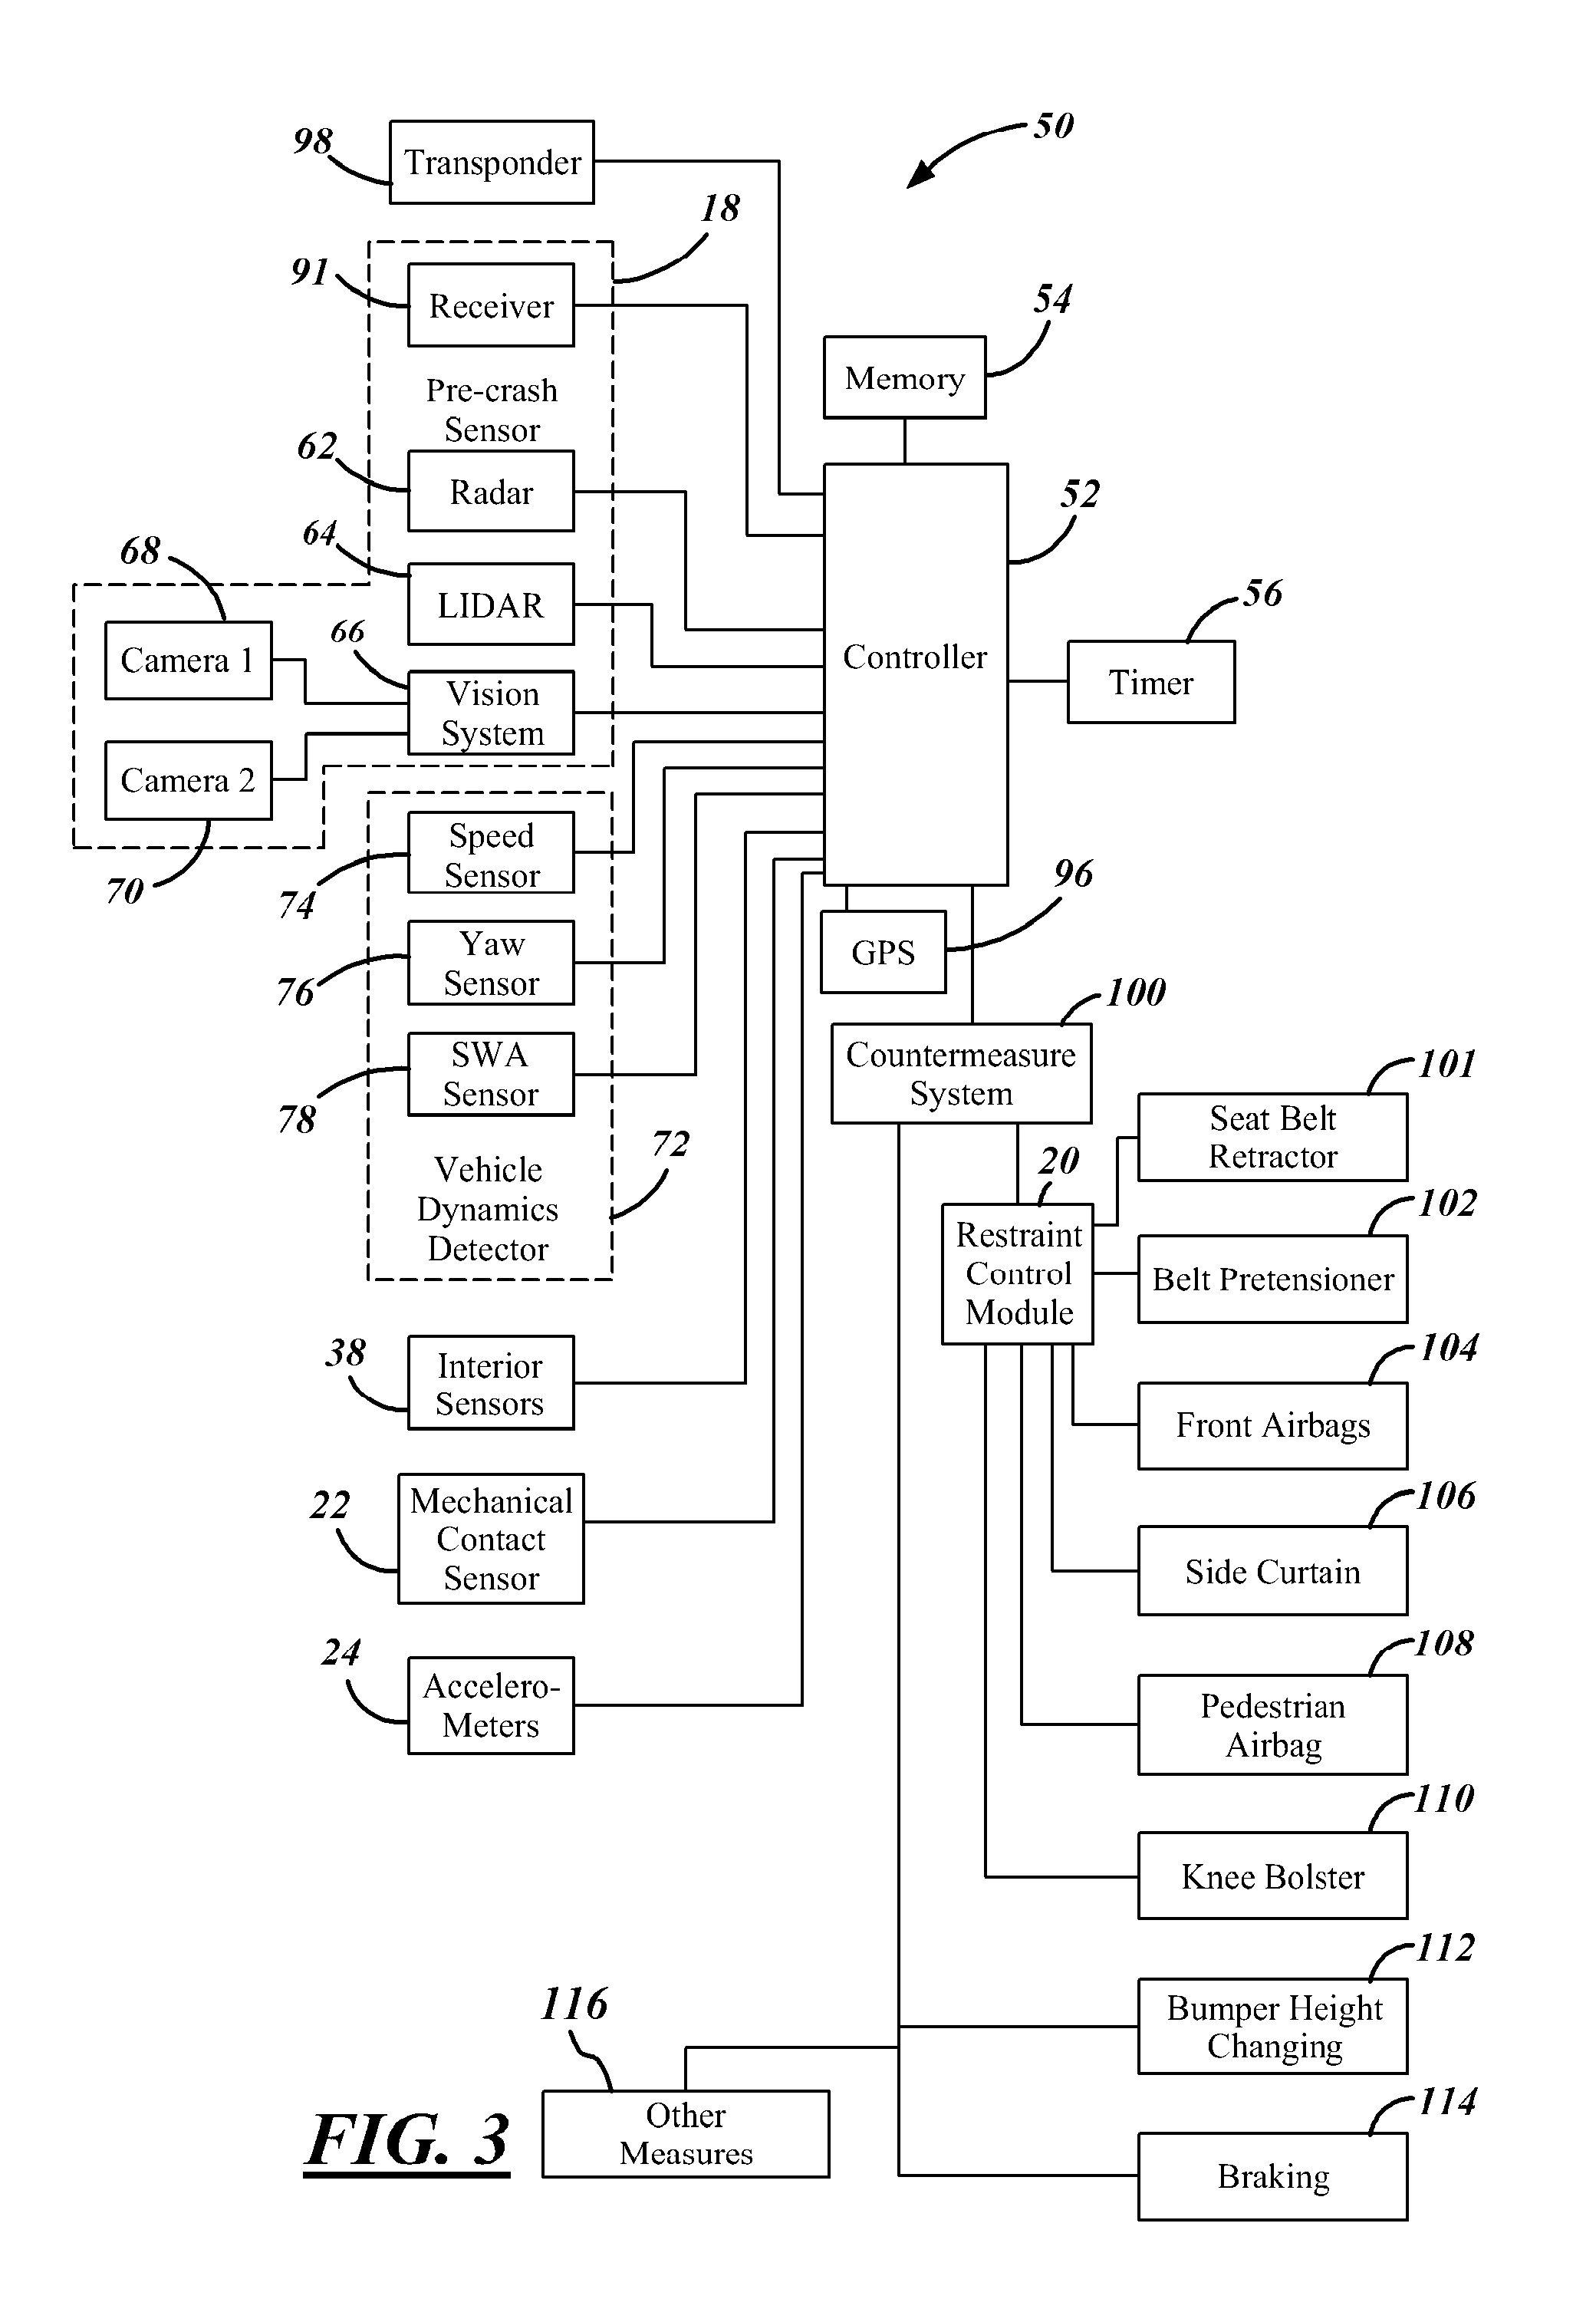 Method for operating a pre-crash sensing system to deploy airbags using inflation control